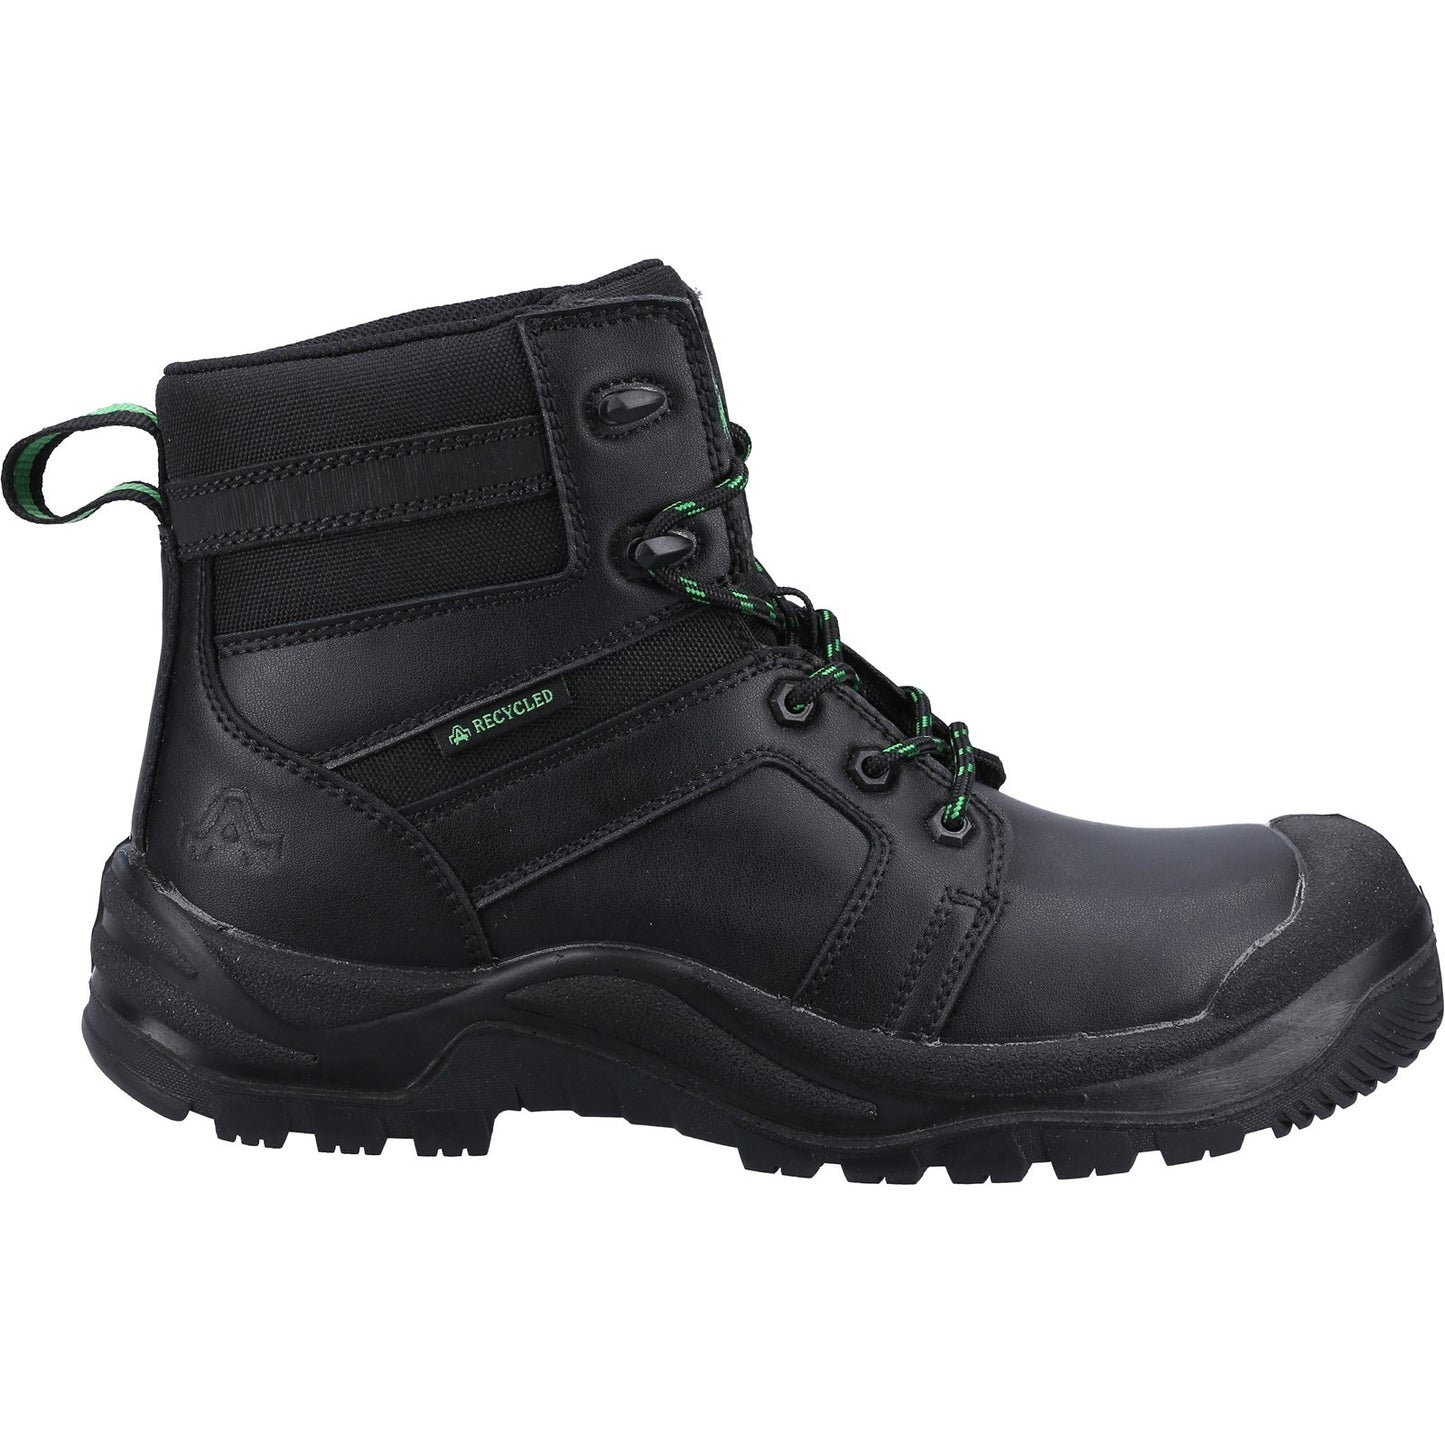 Unisex Amblers Safety 502 Safety Boots